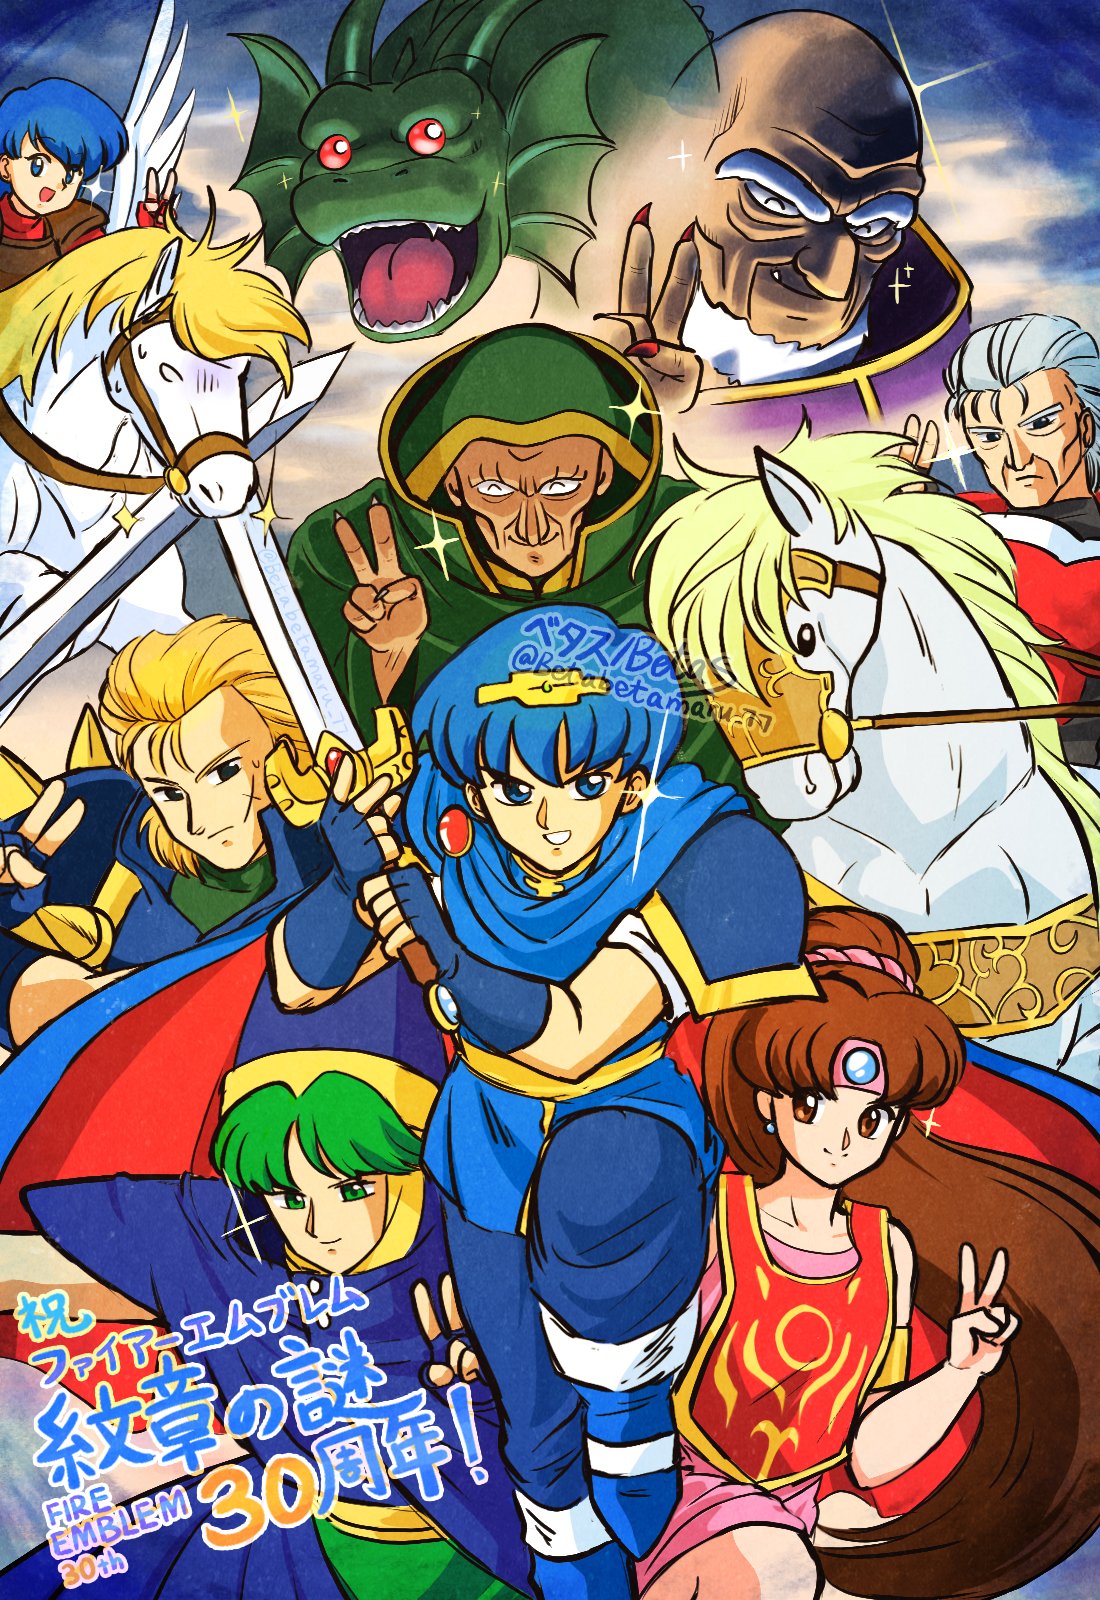 2girls 6+boys ^_^ alternate_form anniversary betabetamaru caeda_(fire_emblem) closed_eyes clouds commentary_request copyright_name derivative_work dragon fire_emblem fire_emblem:_mystery_of_the_emblem gharnef hat highres holding holding_sword holding_weapon horse jagen_(fire_emblem) linde_(fire_emblem) marth_(fire_emblem) medeus merrin_(fire_emblem) multiple_boys multiple_girls ogma_(fire_emblem) pegasus robe smile sparkle sword translation_request v weapon wizard_hat